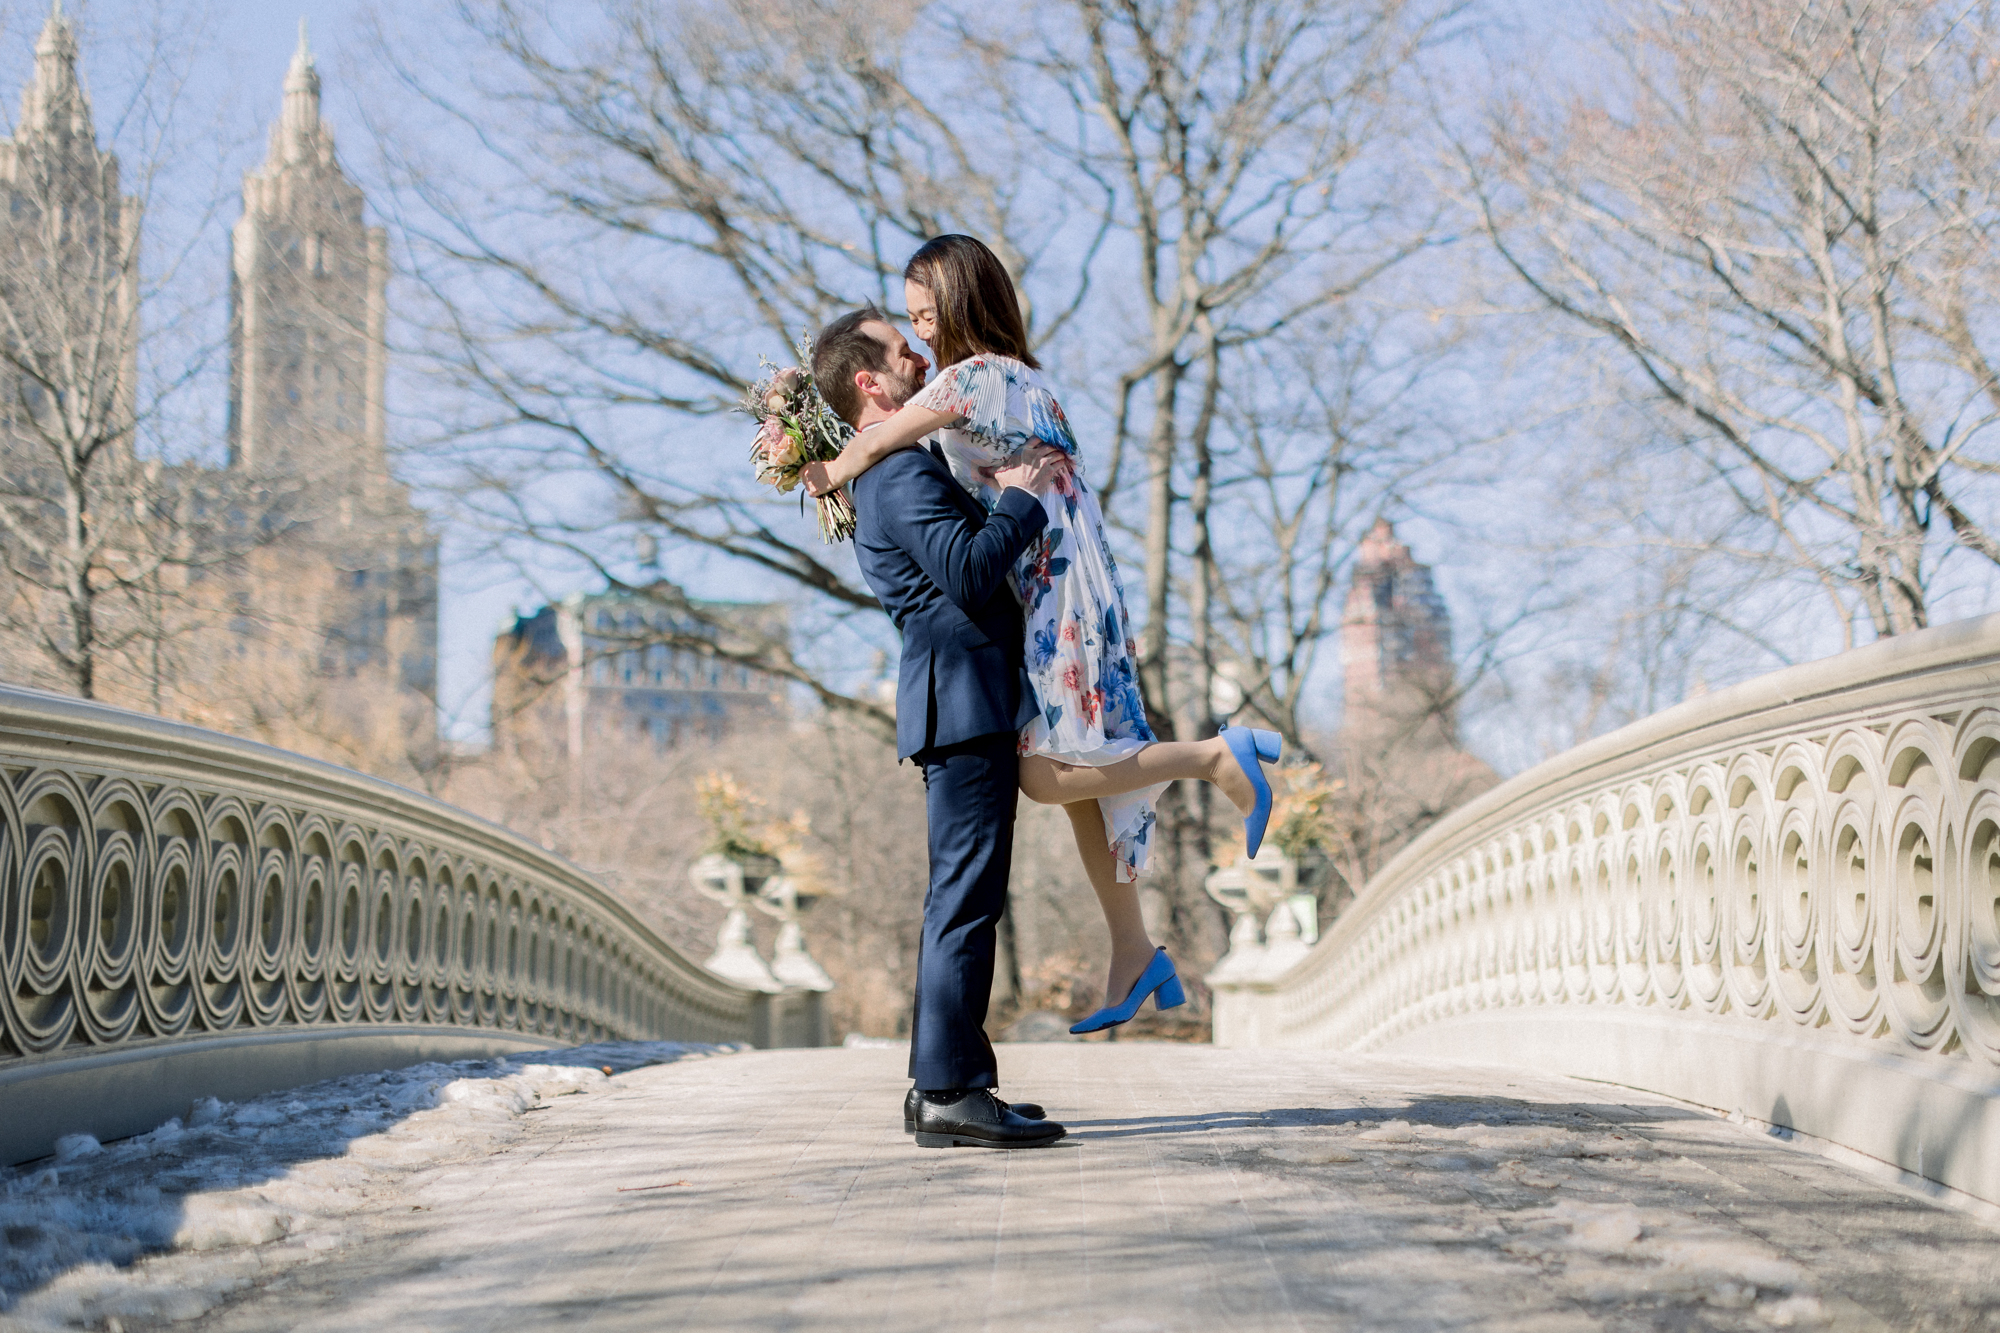 Candid Central Park Wedding Photos in Wintery New York